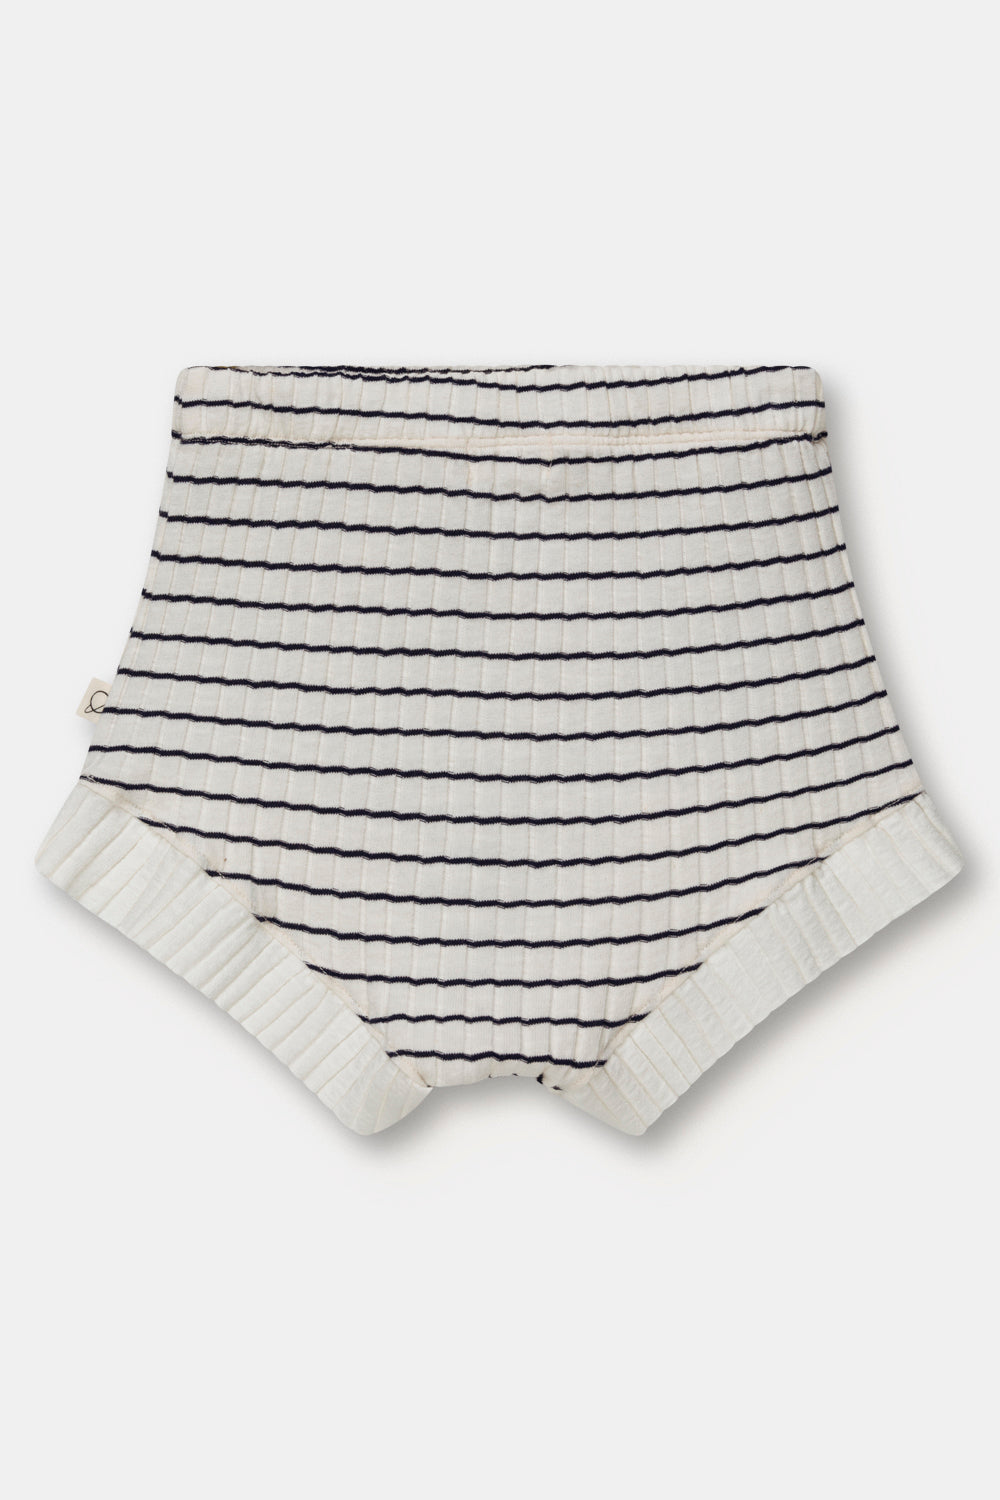 My Little Cozmo Abril Shorts - Ivory